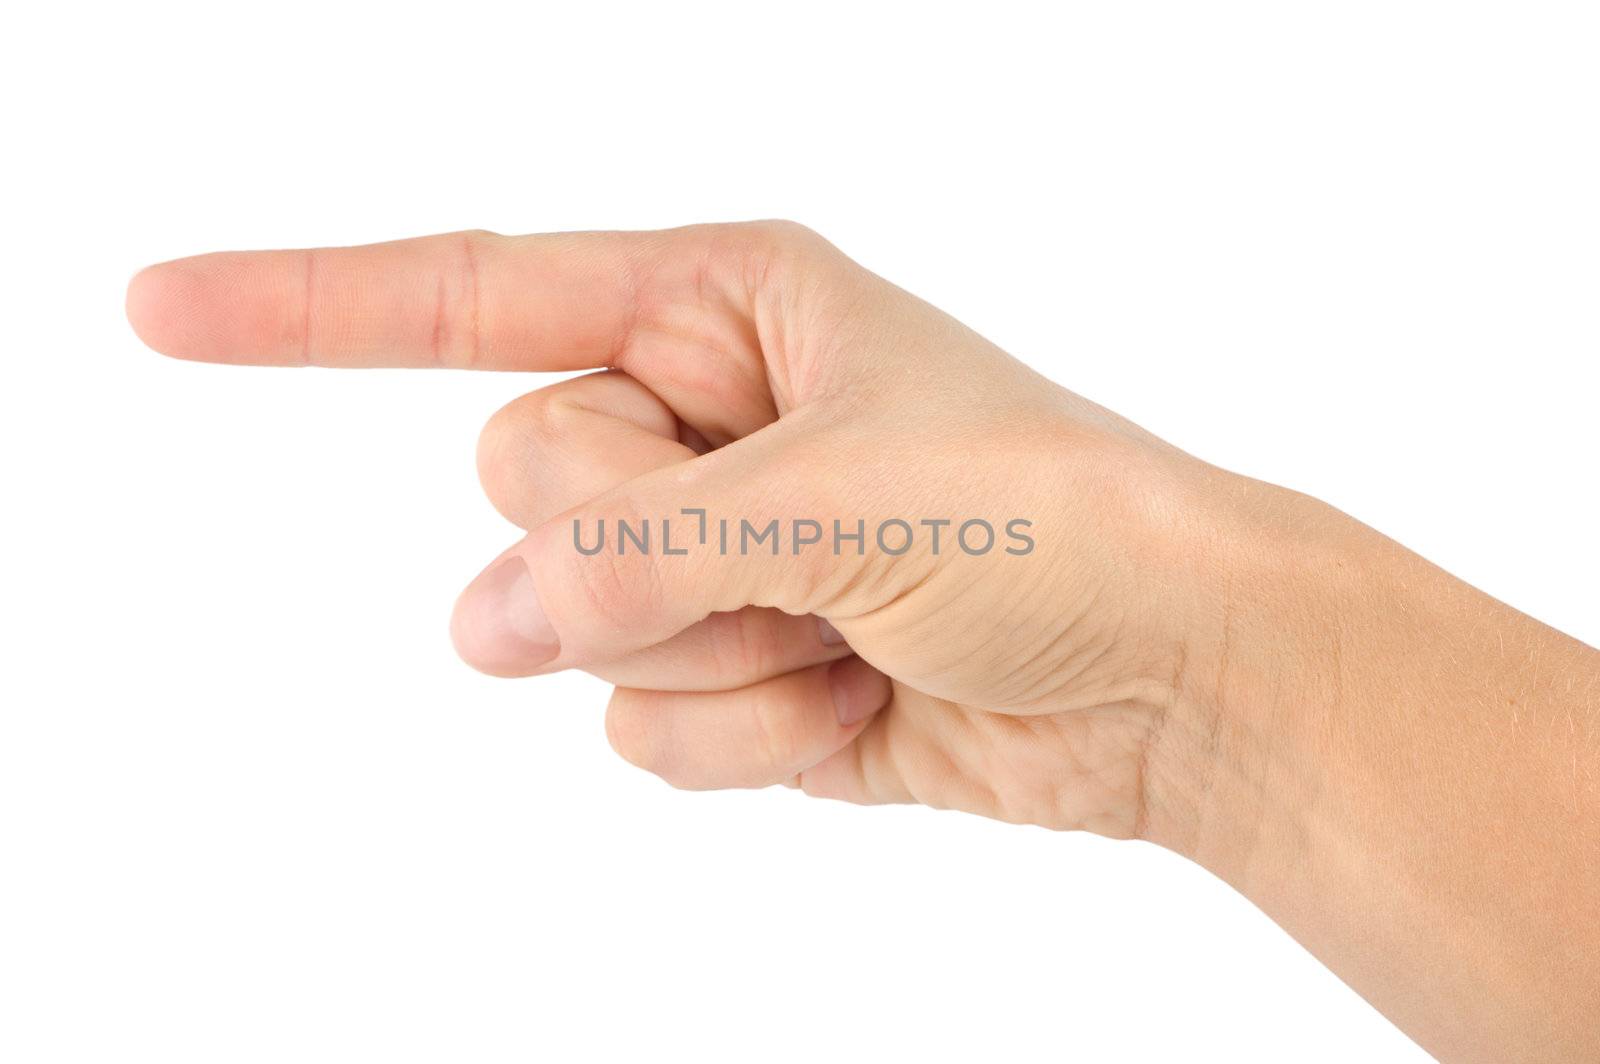 Hand simulating pressing a button or something else with index finger extended, isolated on a white background. 